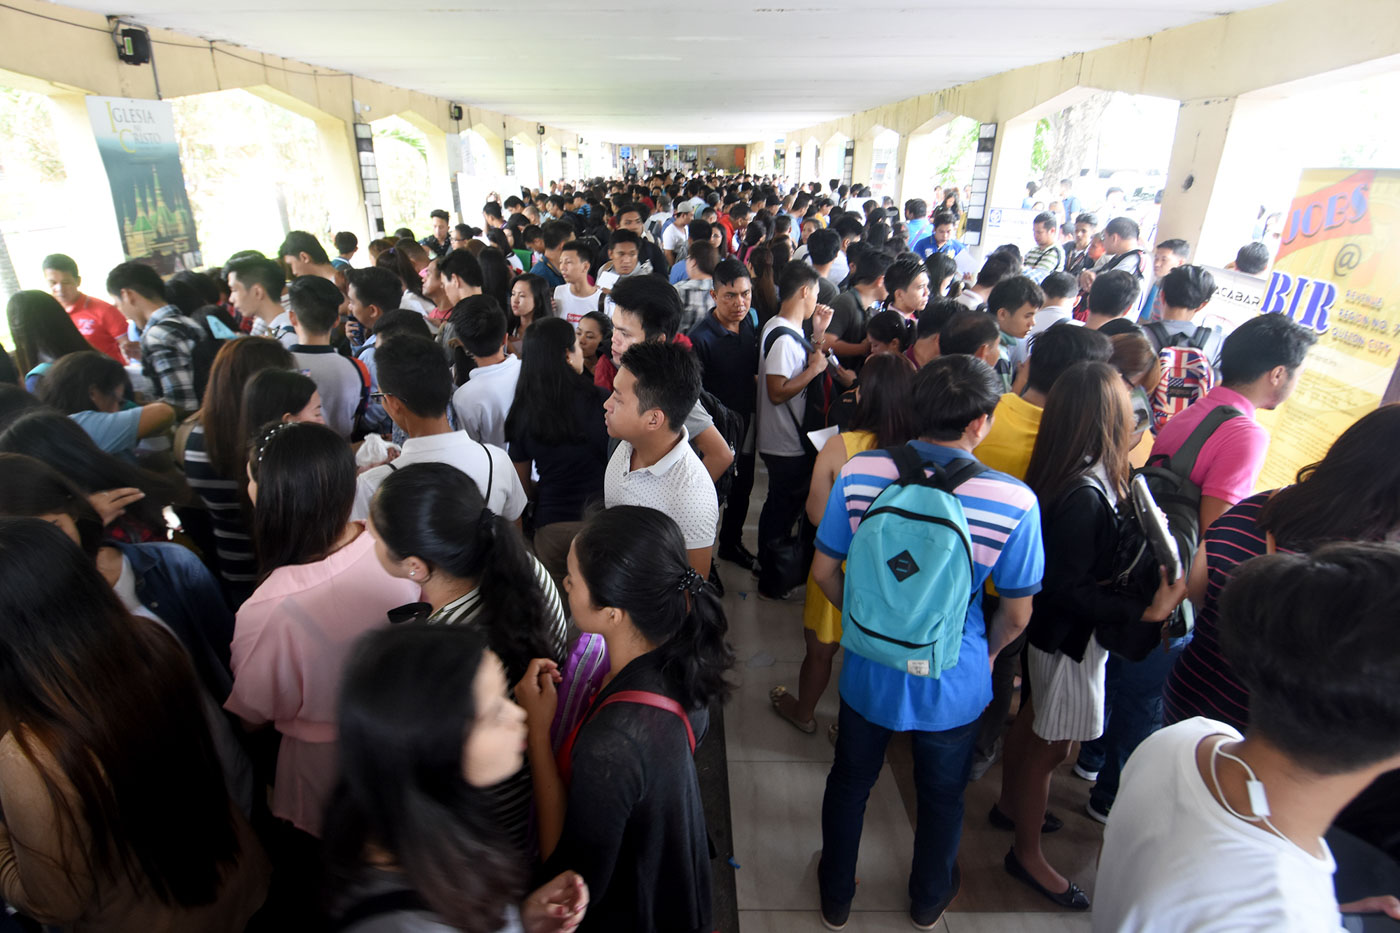 JOB-HUNTERS. Hundreds try their luck at a job fair held on Mabor Day, May 1, 2018, in Quezon City. Photo by Angie de Silva/Rappler 